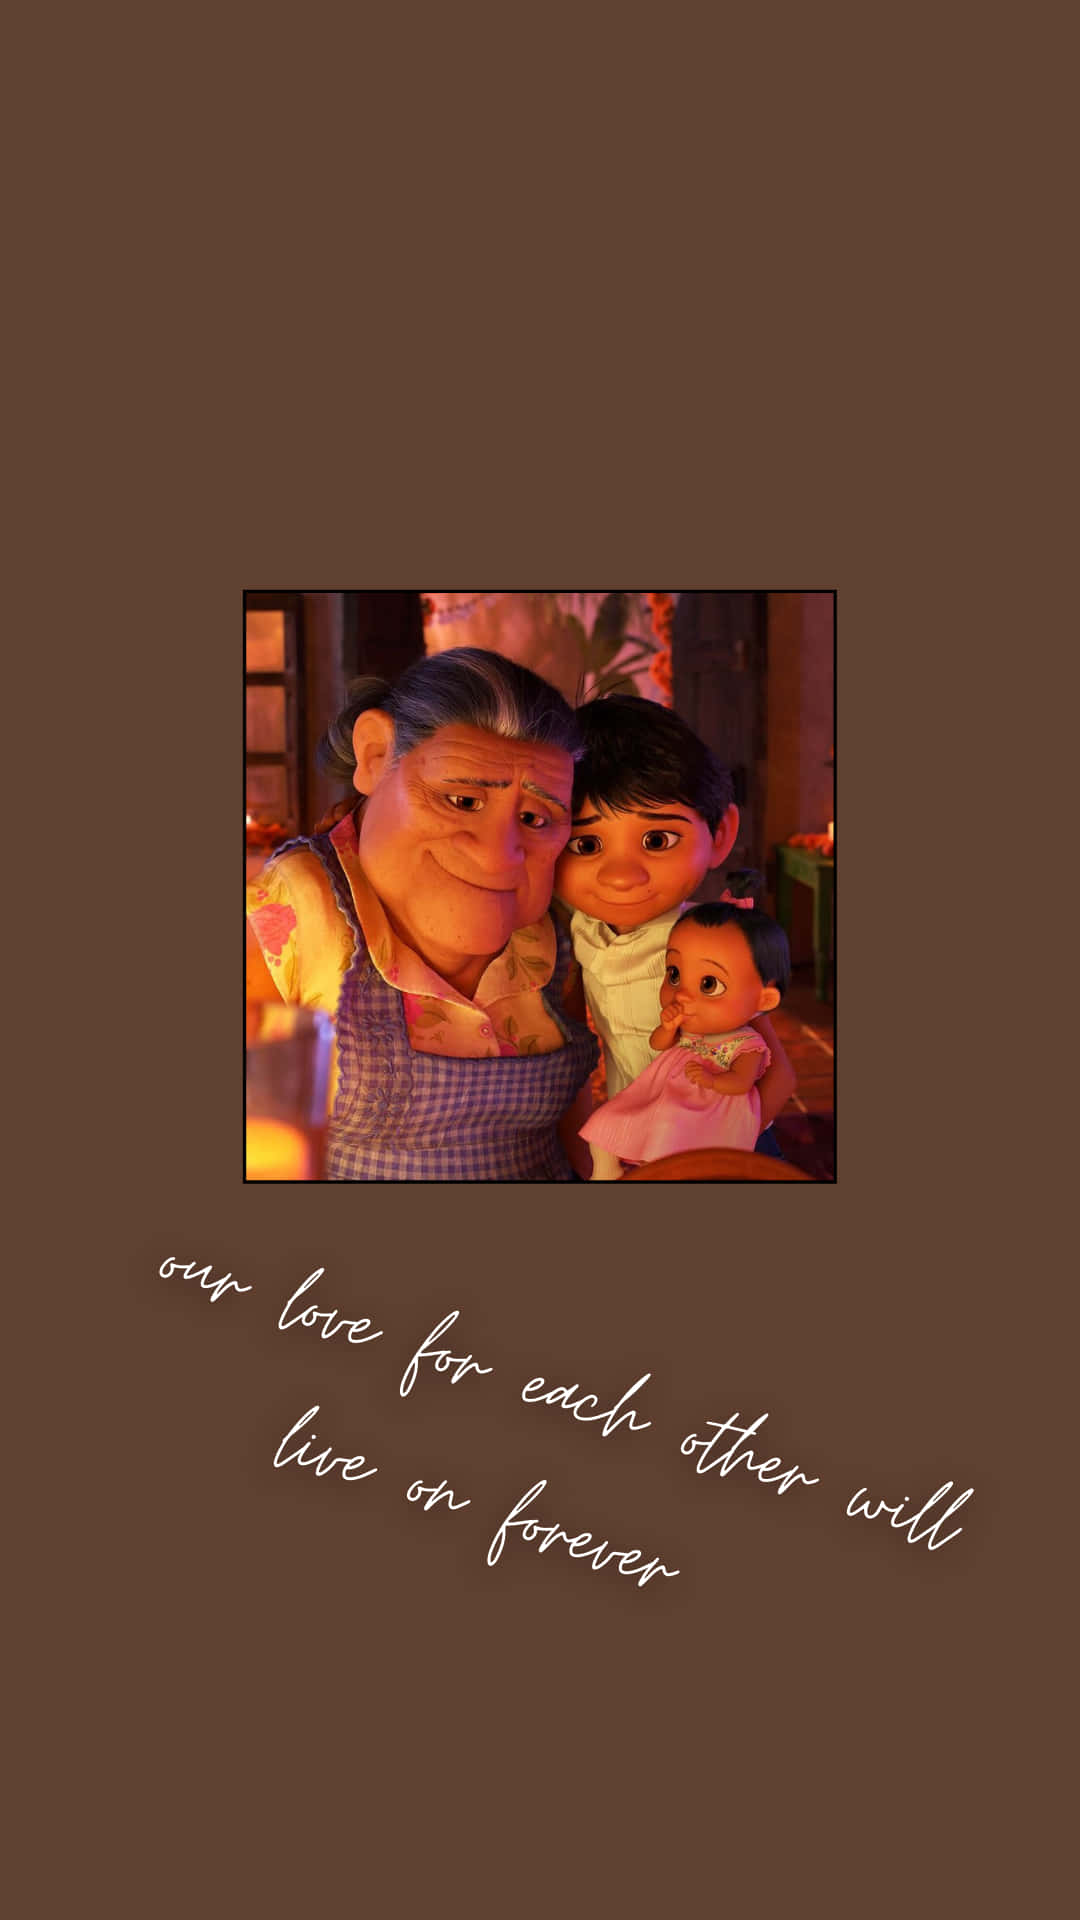 Join Miguel and his fantastical family on their magical adventures in Disney Pixar’s Coco! Wallpaper